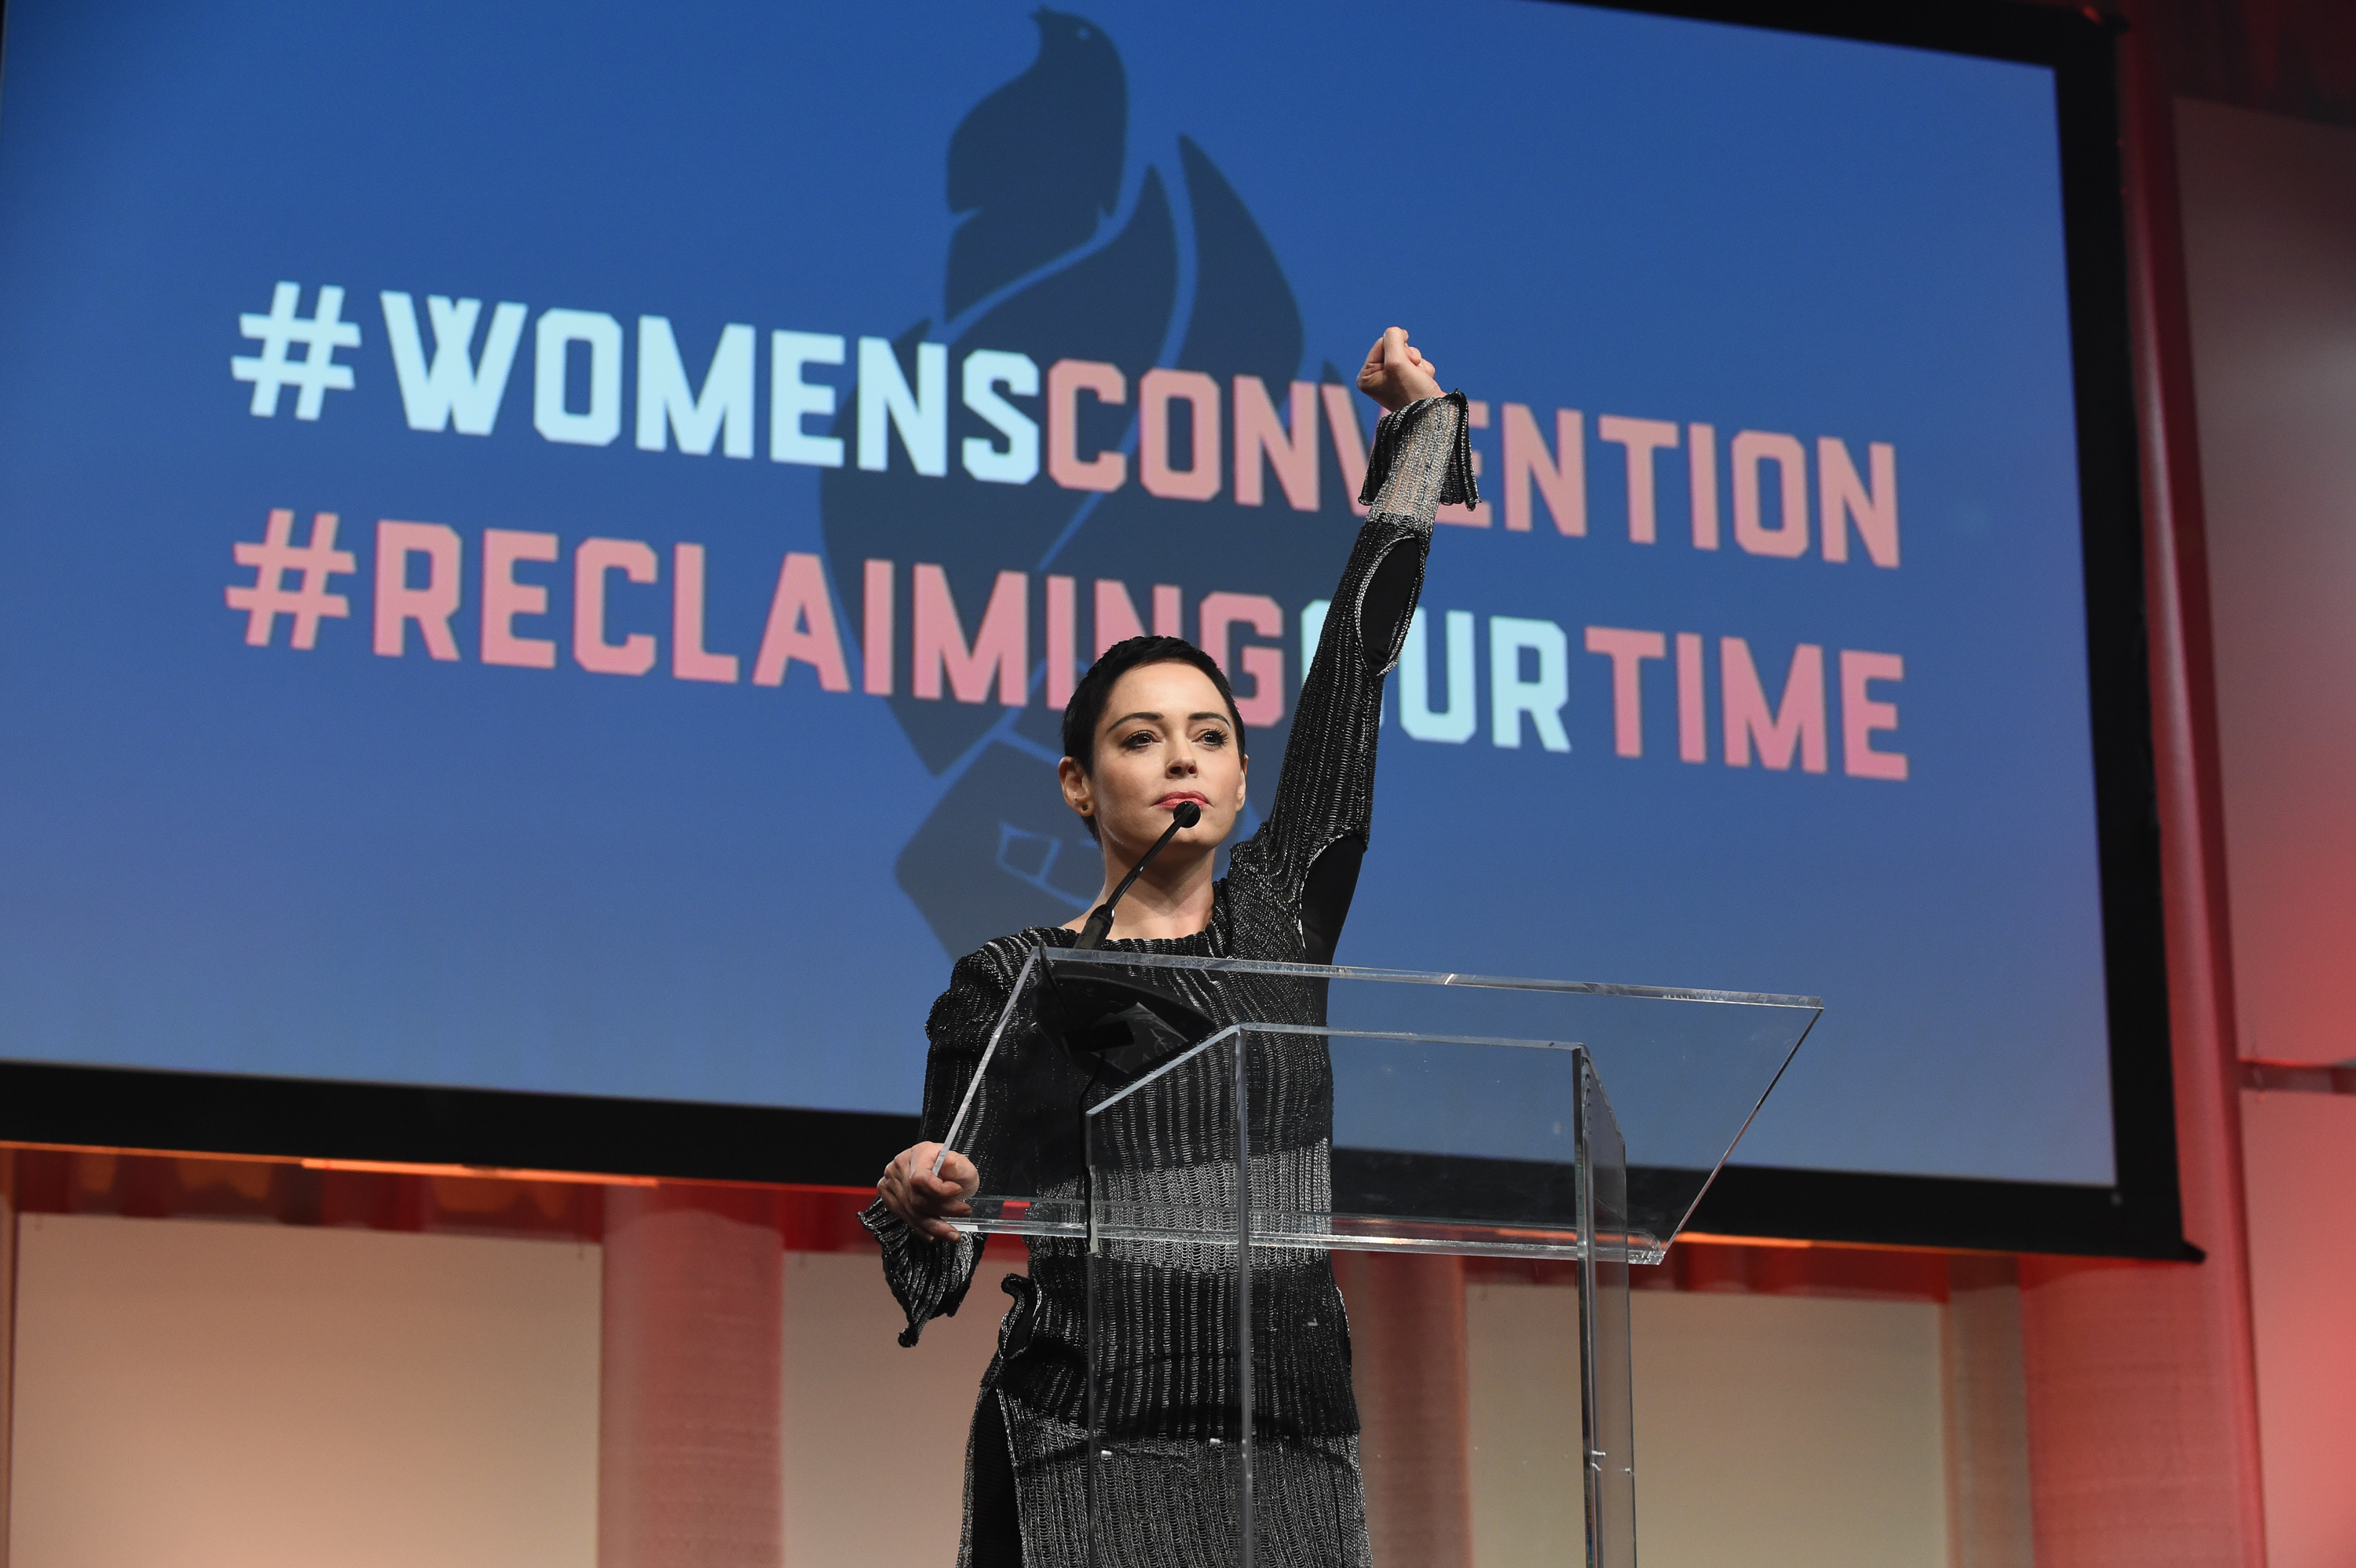 Rose McGowan speaks on stage at The Women's Convention in Detroit, Michigan, on October 27, 2017. | Source: Getty Images